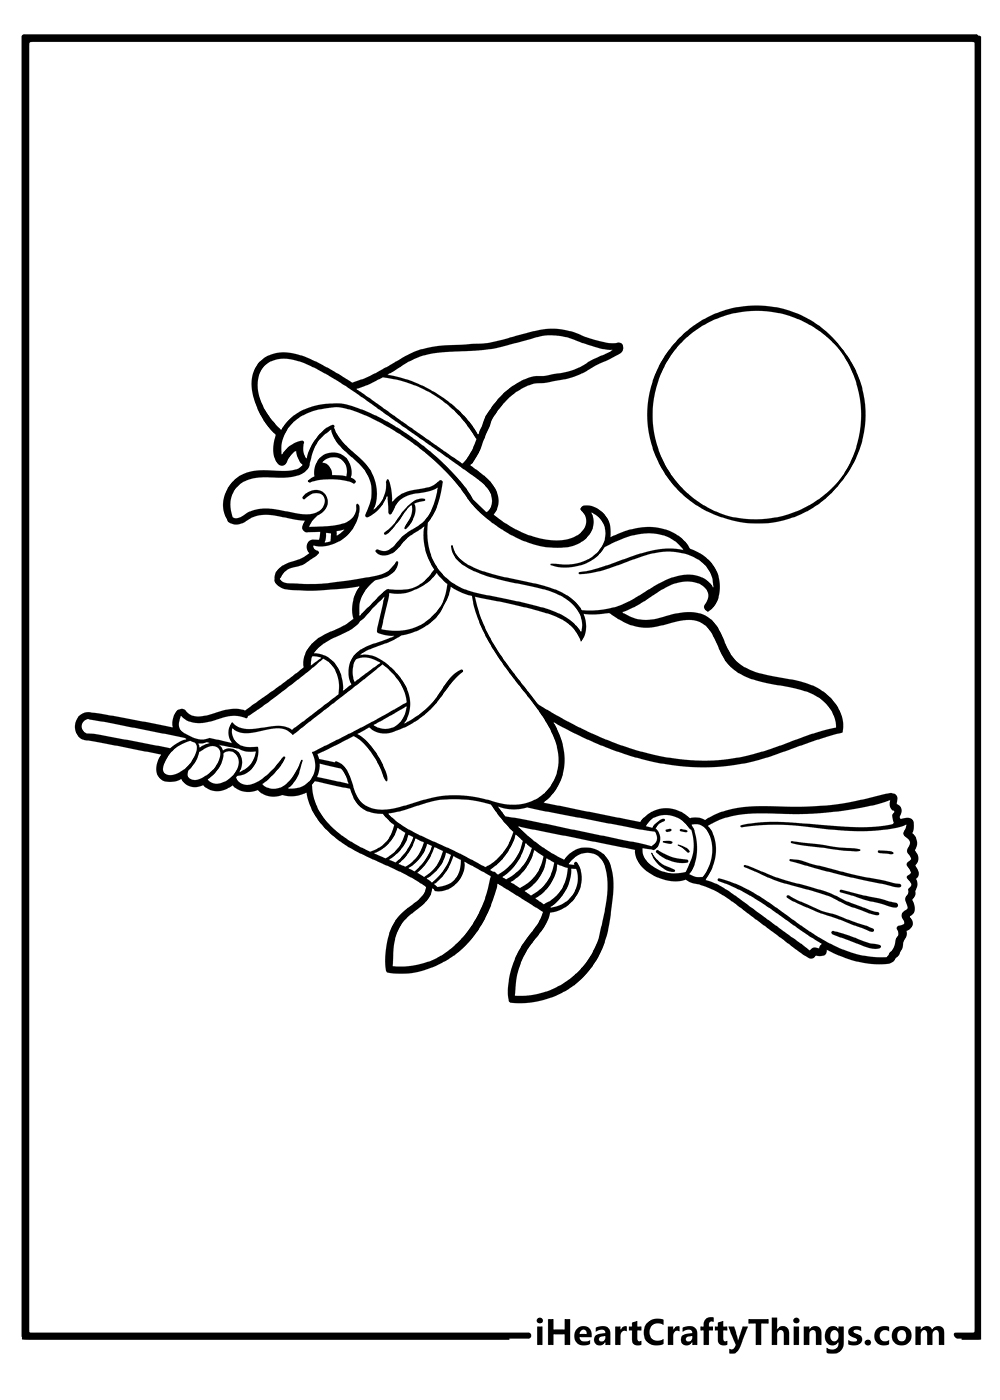 Witch Coloring Pages for kids free download